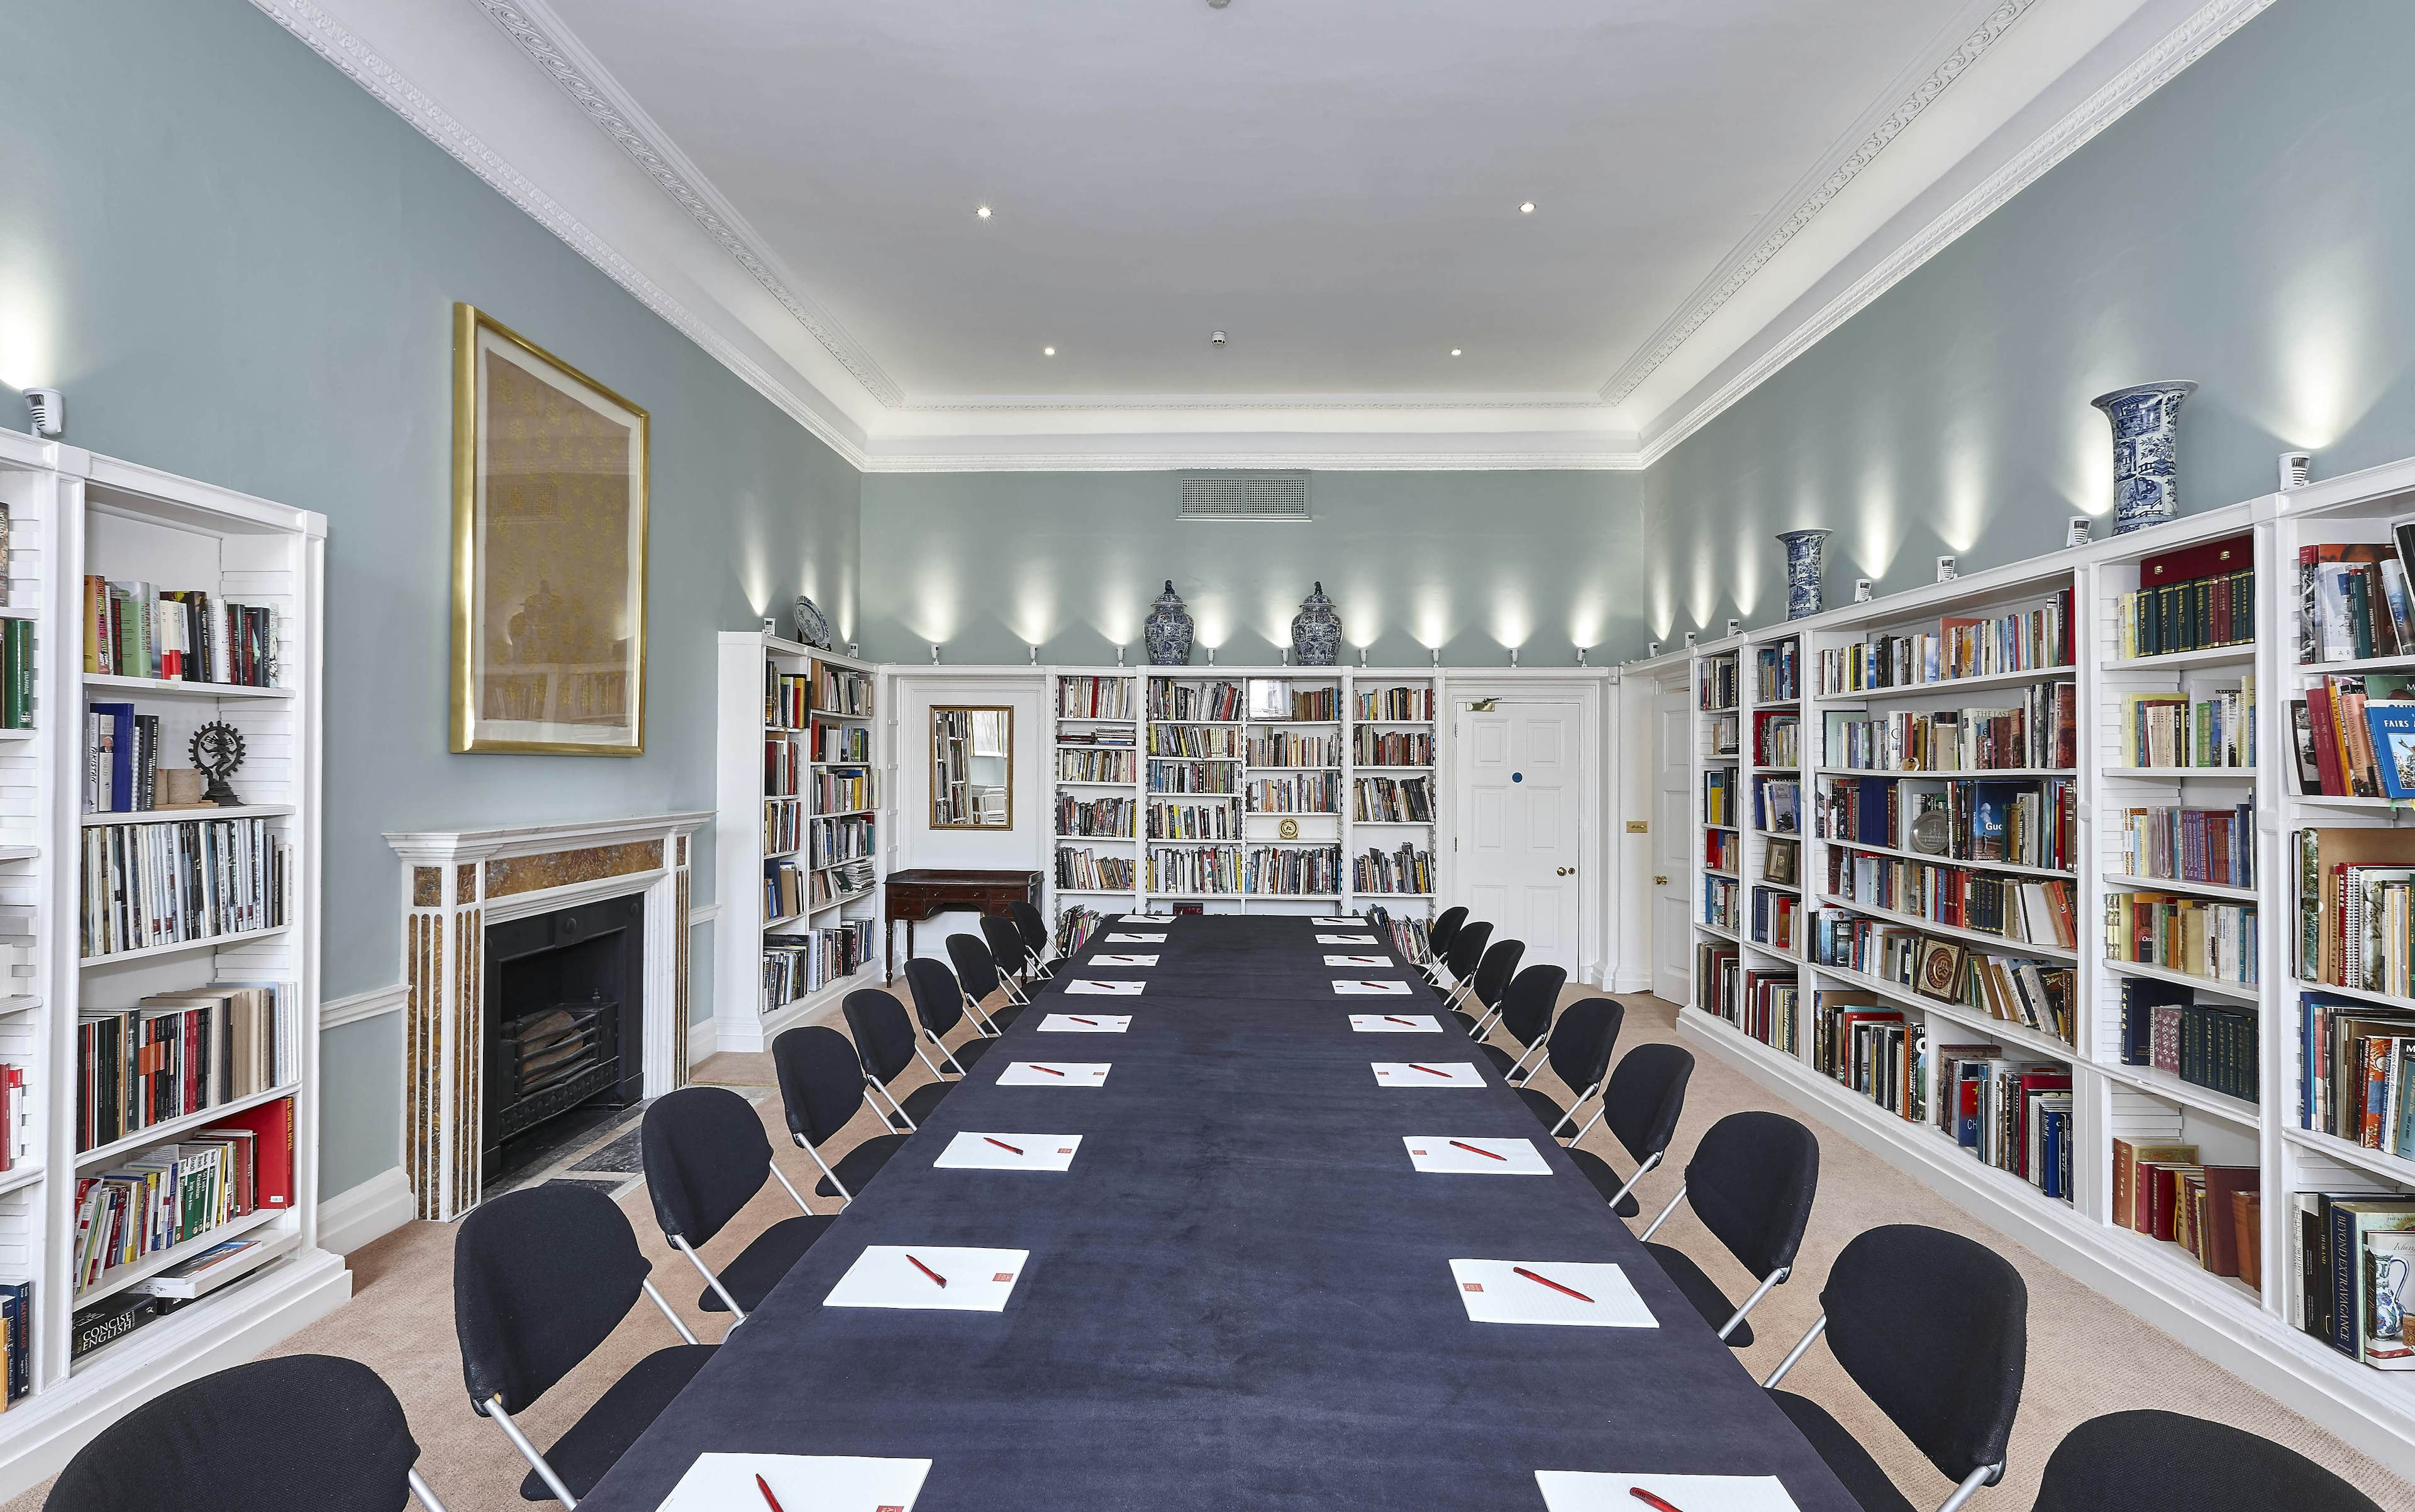 Asia House - Library image 1